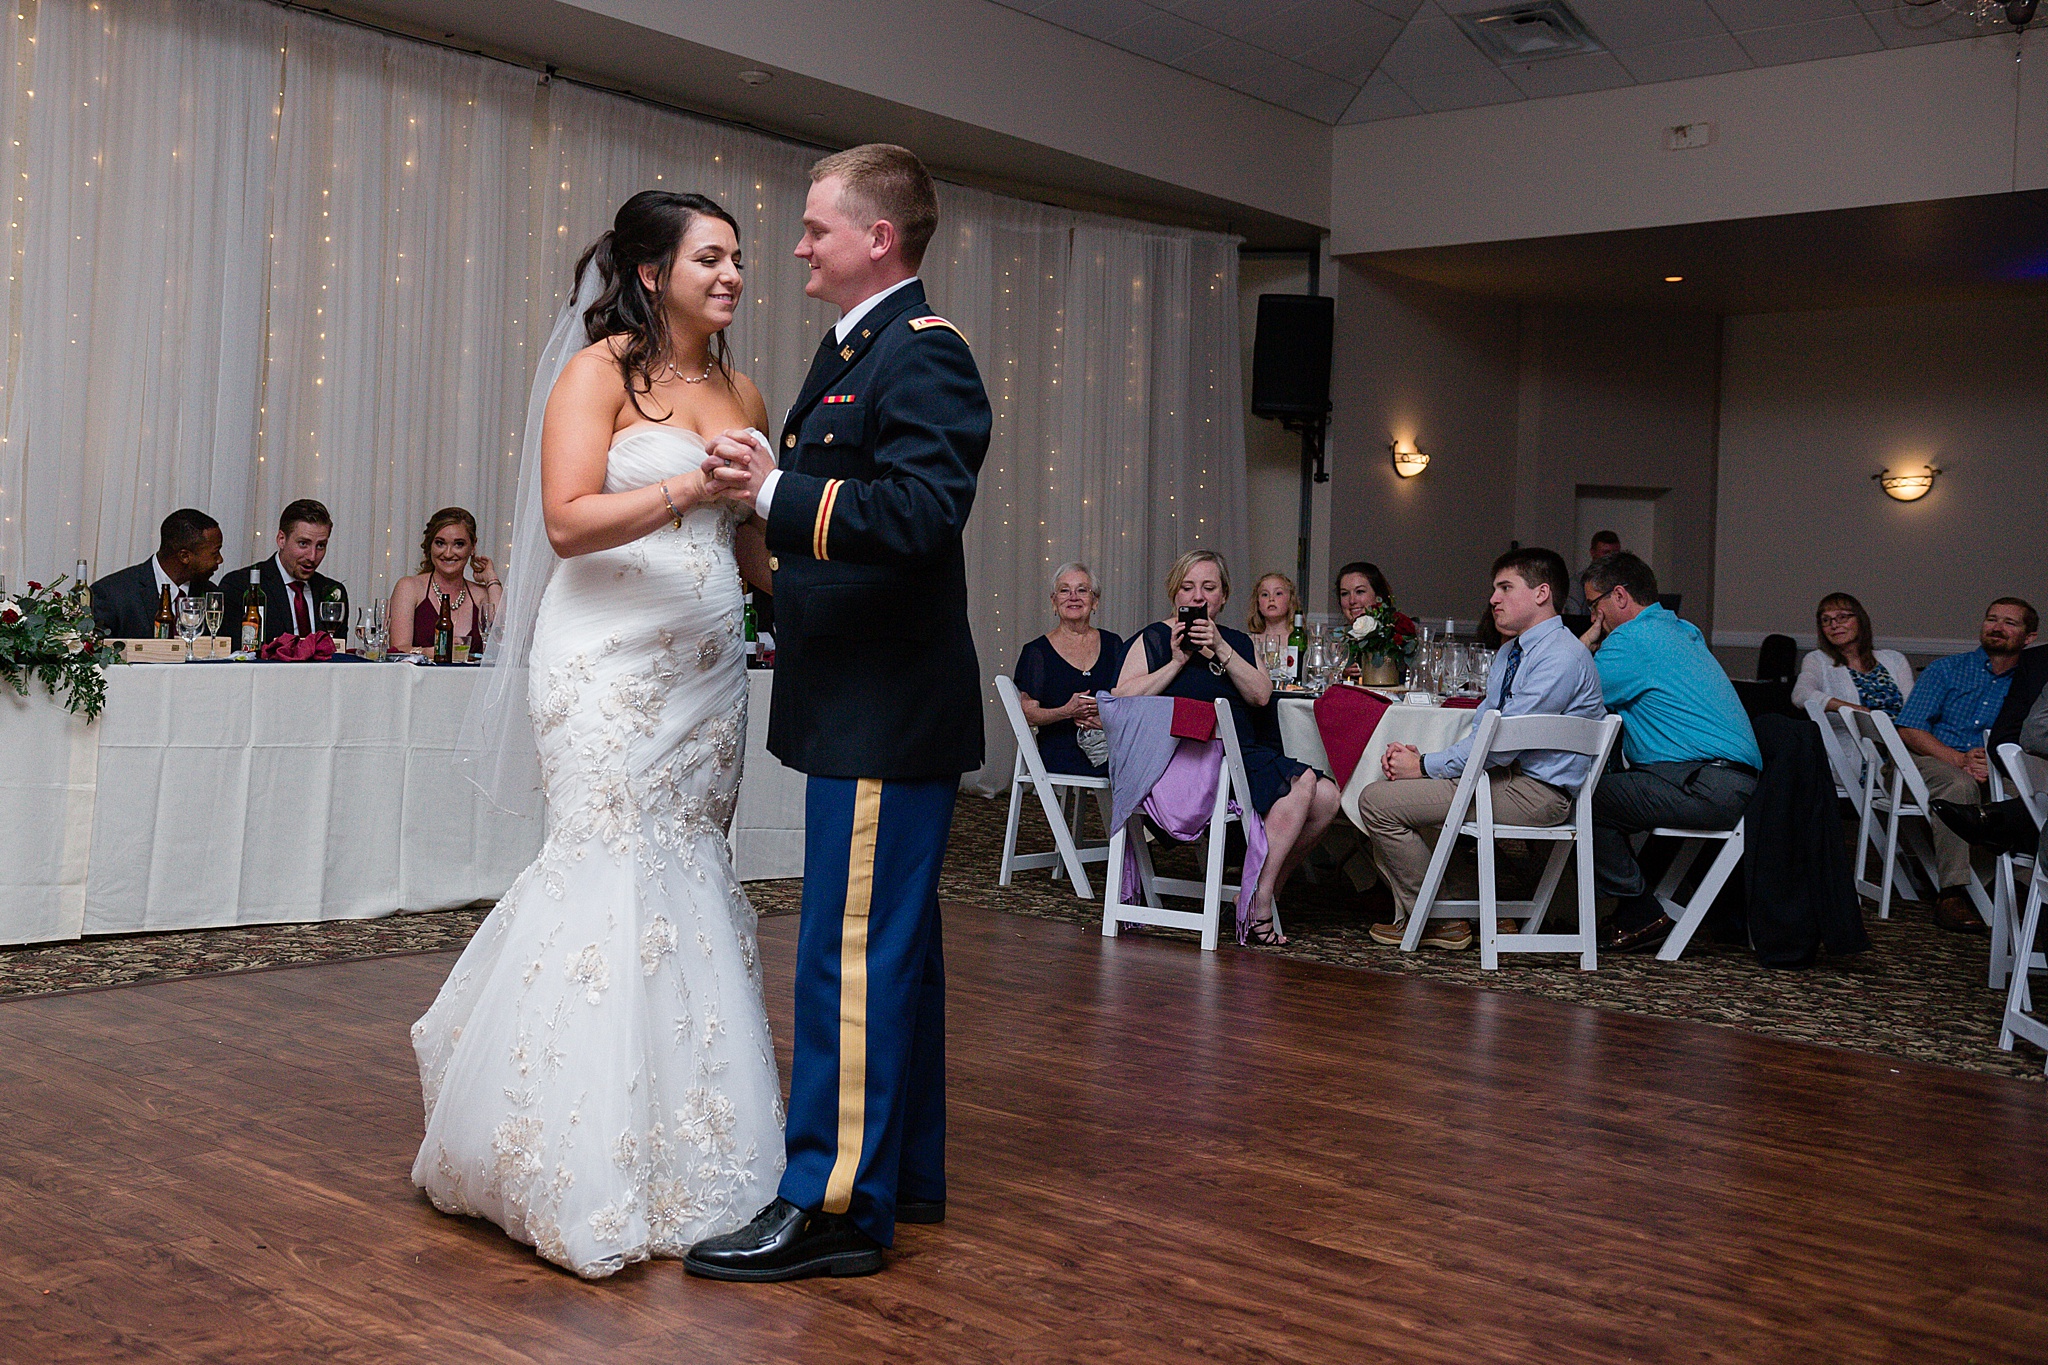 Bride & Groom’s first dance during the wedding reception. Tania & Chris' Denver Wedding at the Wedgewood Ken Caryl by Colorado Wedding Photography, Jennifer Garza. Colorado Wedding Photographer, Colorado Wedding Photography, Denver Wedding Photographer, Denver Wedding Photography, US Marine Corp Wedding, US Marine Corp, Military Wedding, US Marines, Wedgewood Weddings, Wedgewood Weddings Ken Caryl, Colorado Wedding, Denver Wedding, Wedding Photographer, Colorado Bride, Brides of Colorado